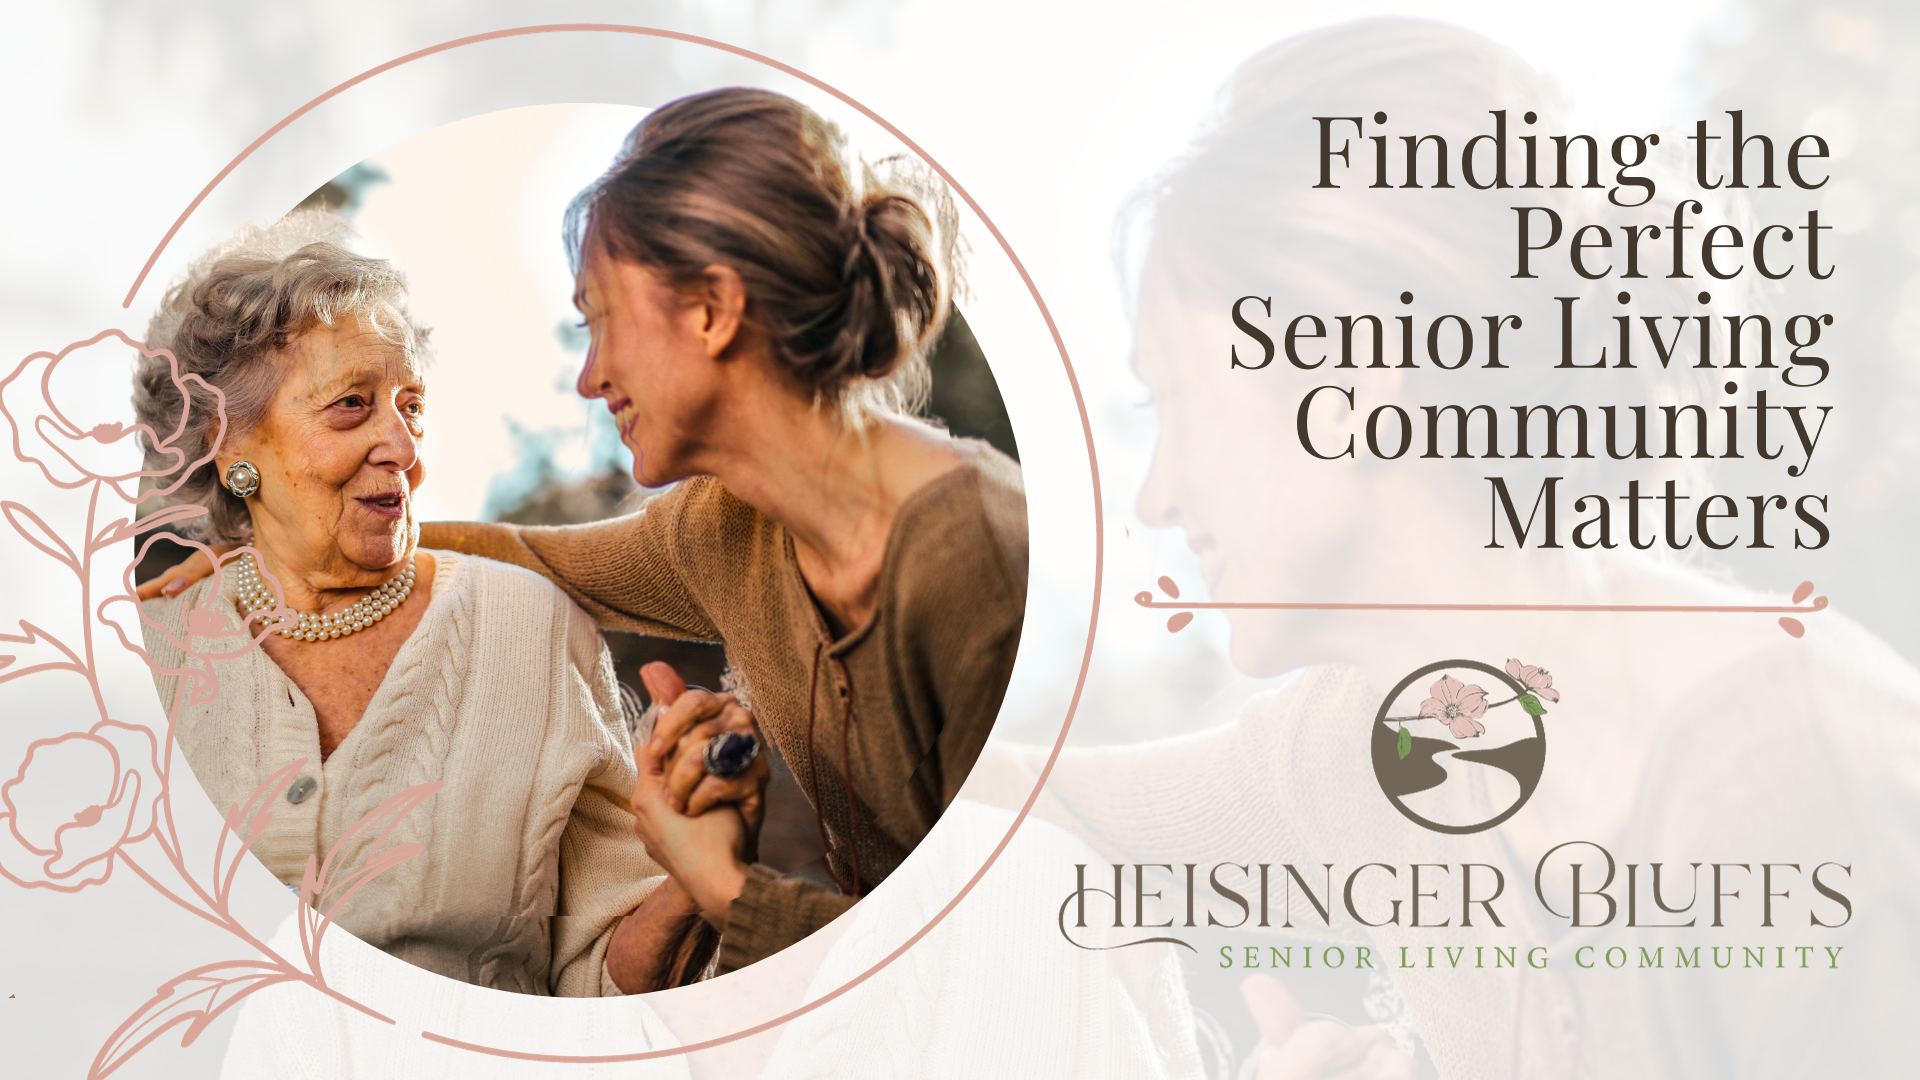 Heisinger Bluffs is a place that matches your lifestyle, health needs, and location